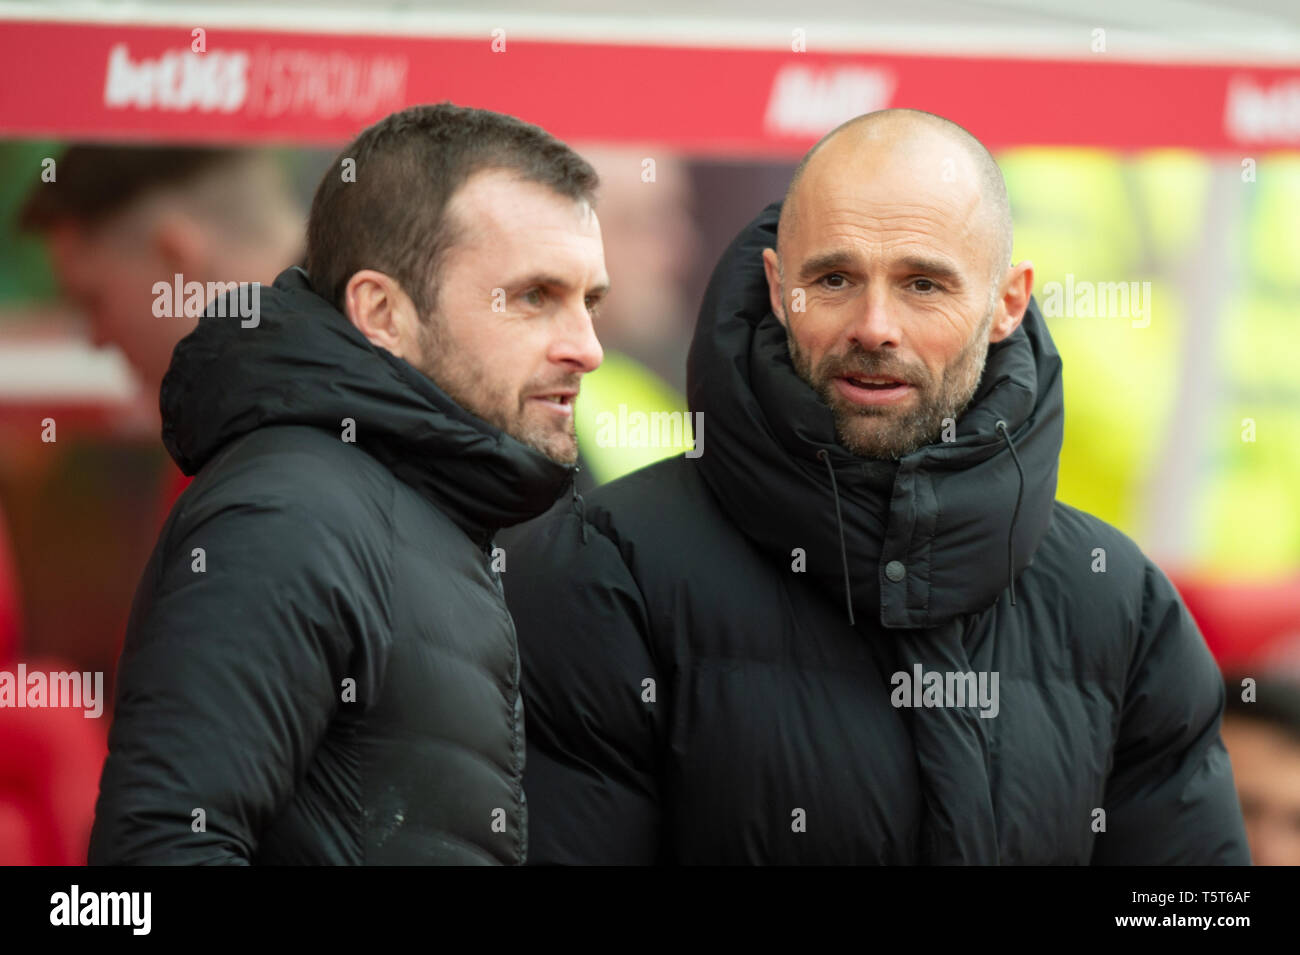 13th April 2019 , Bet 365 Stadium, Stoke-on-Trent, England; Sky Bet Championship, Stoke City vs Rotherham United ; Paul Wayne manager of Rotherham United and Nathan Jones manager of Stoke City chat before the game   Credit: Richard Long/News Images  English Football League images are subject to DataCo Licence Stock Photo